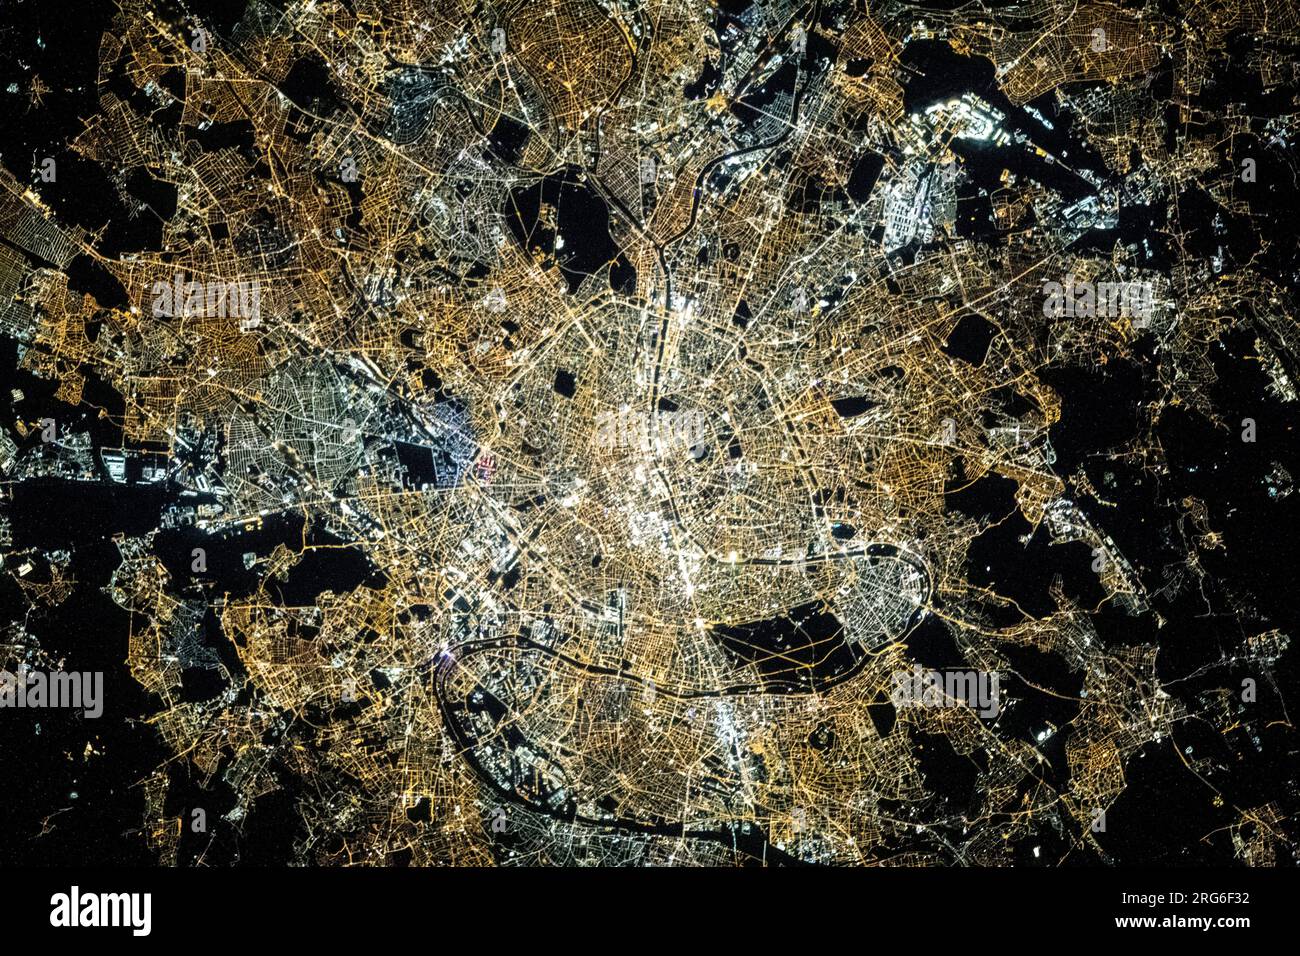 View from space of Paris, France, at night with the Seine River flowing through the middle. Stock Photo